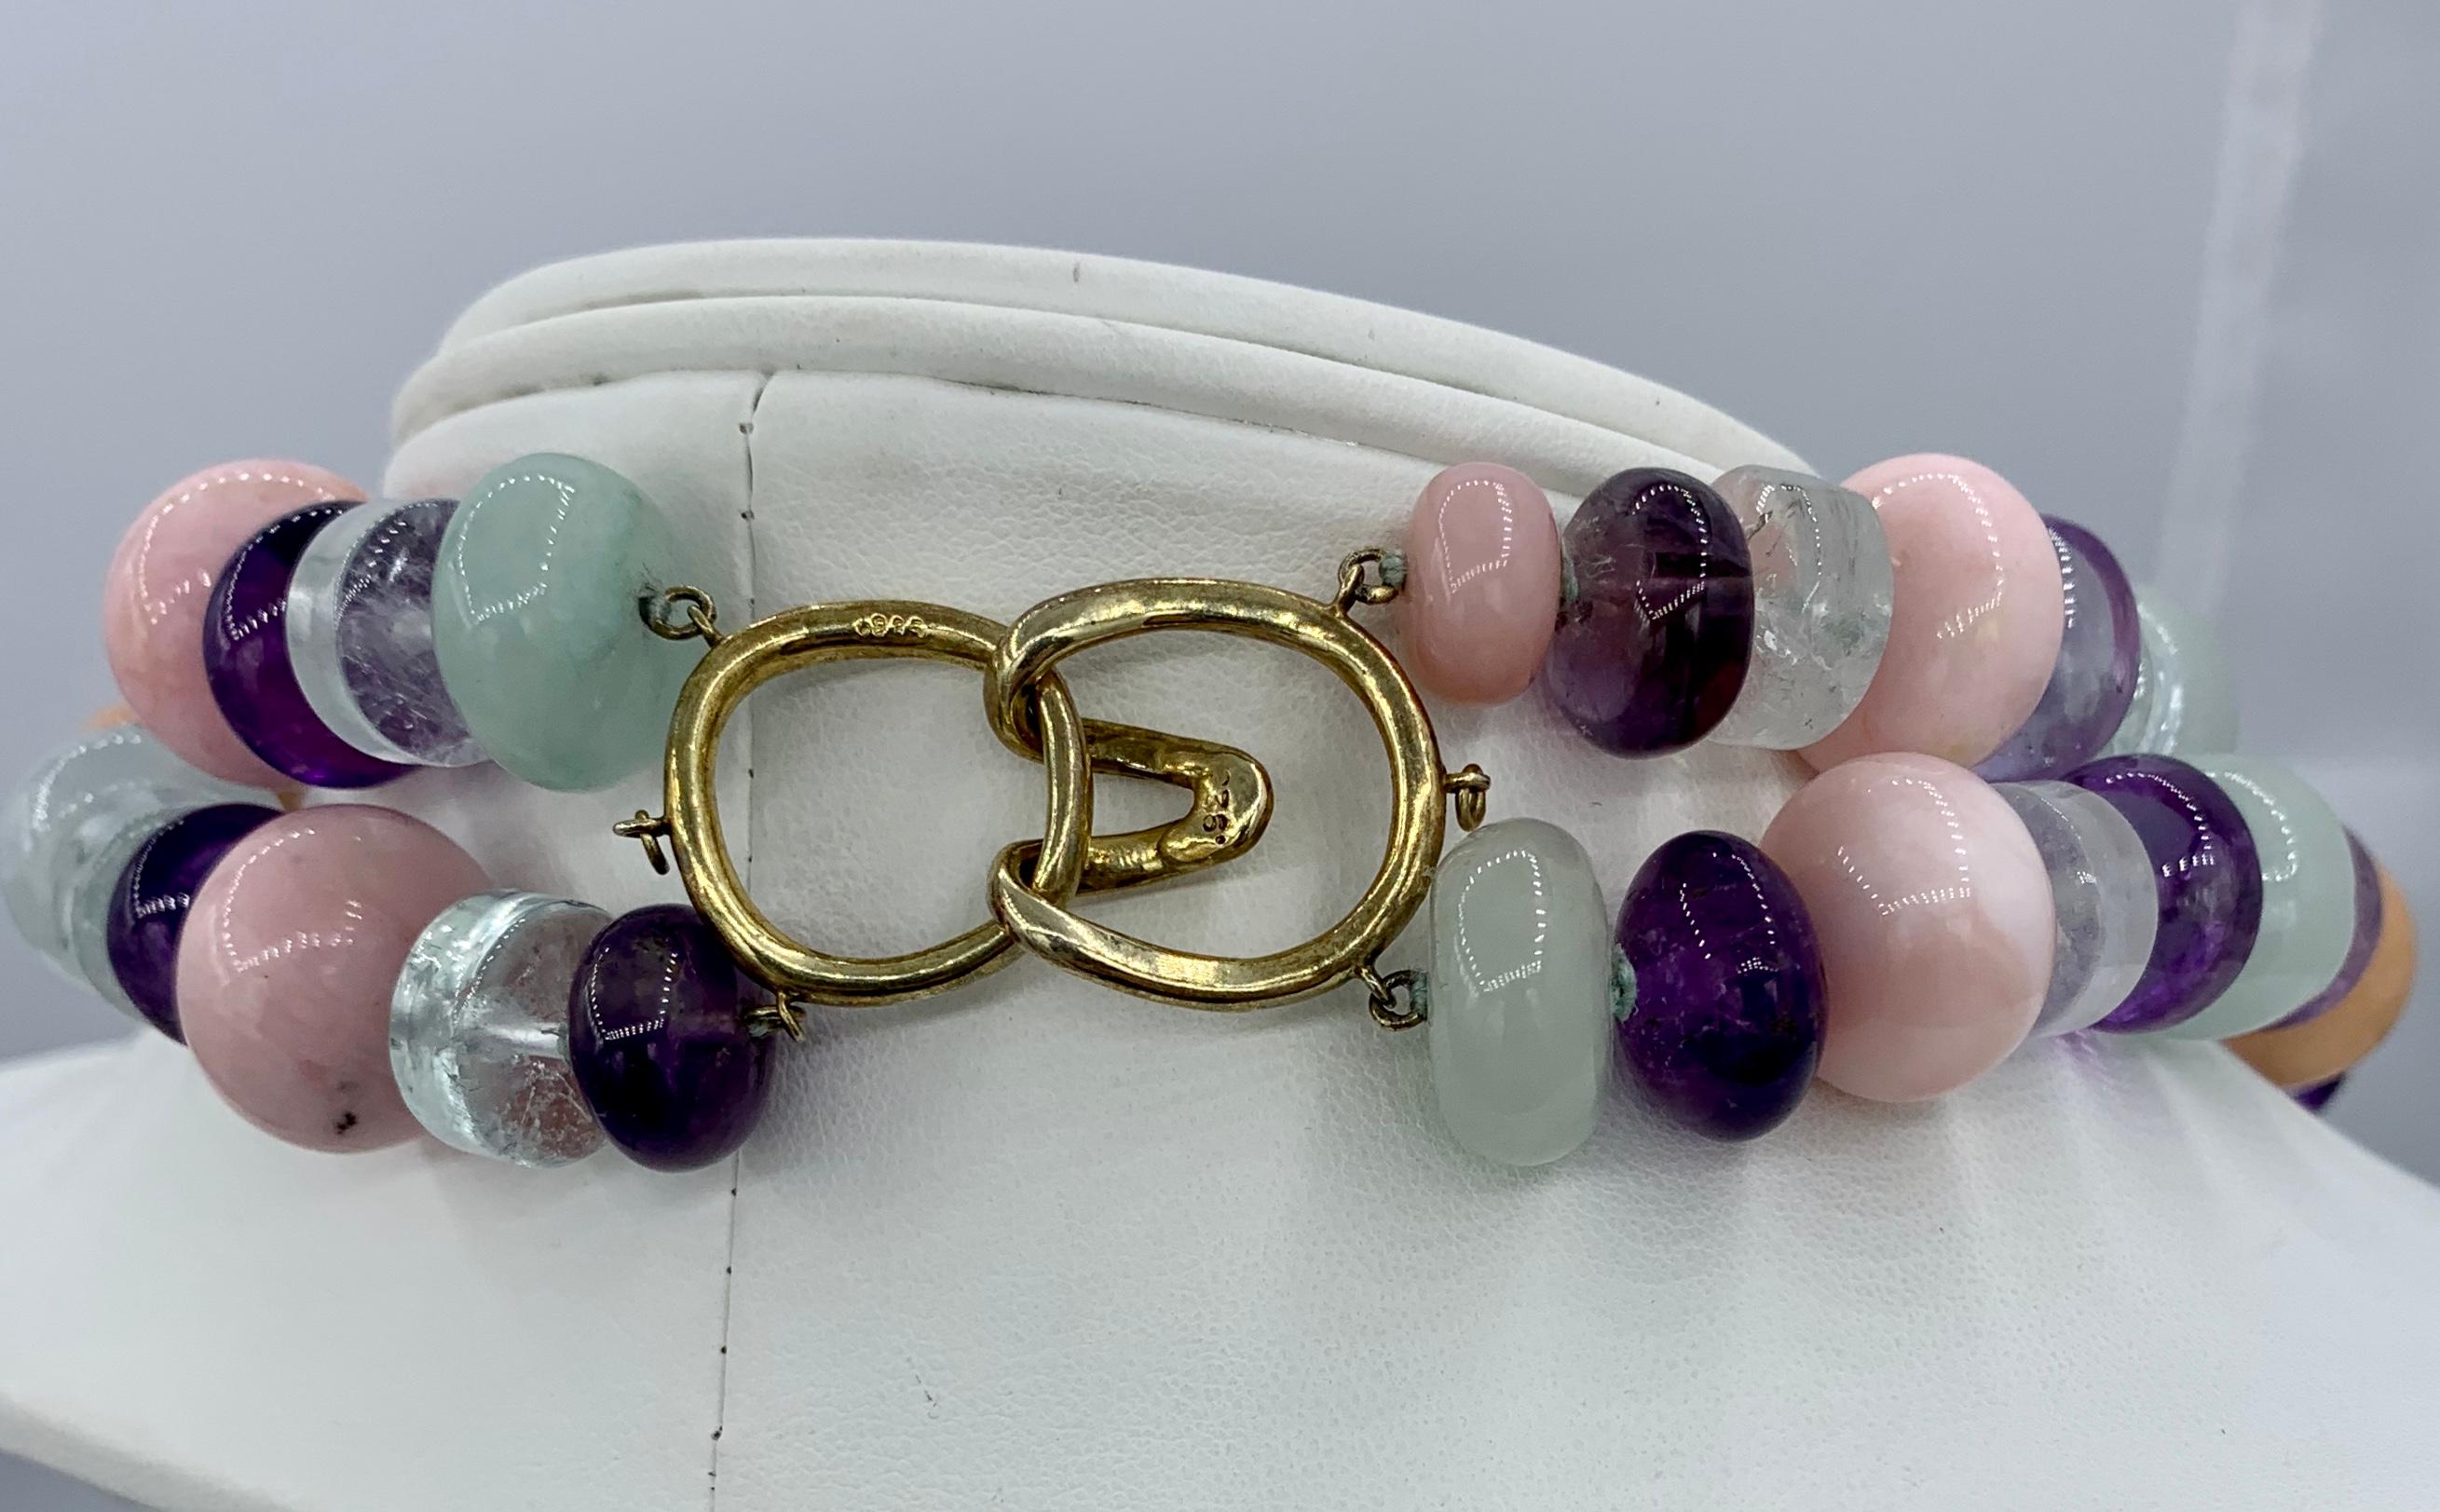 Opal Jade Amethyst Rock Crystal Necklace Estate Barbara Taylor Bradford OBE In Excellent Condition For Sale In New York, NY